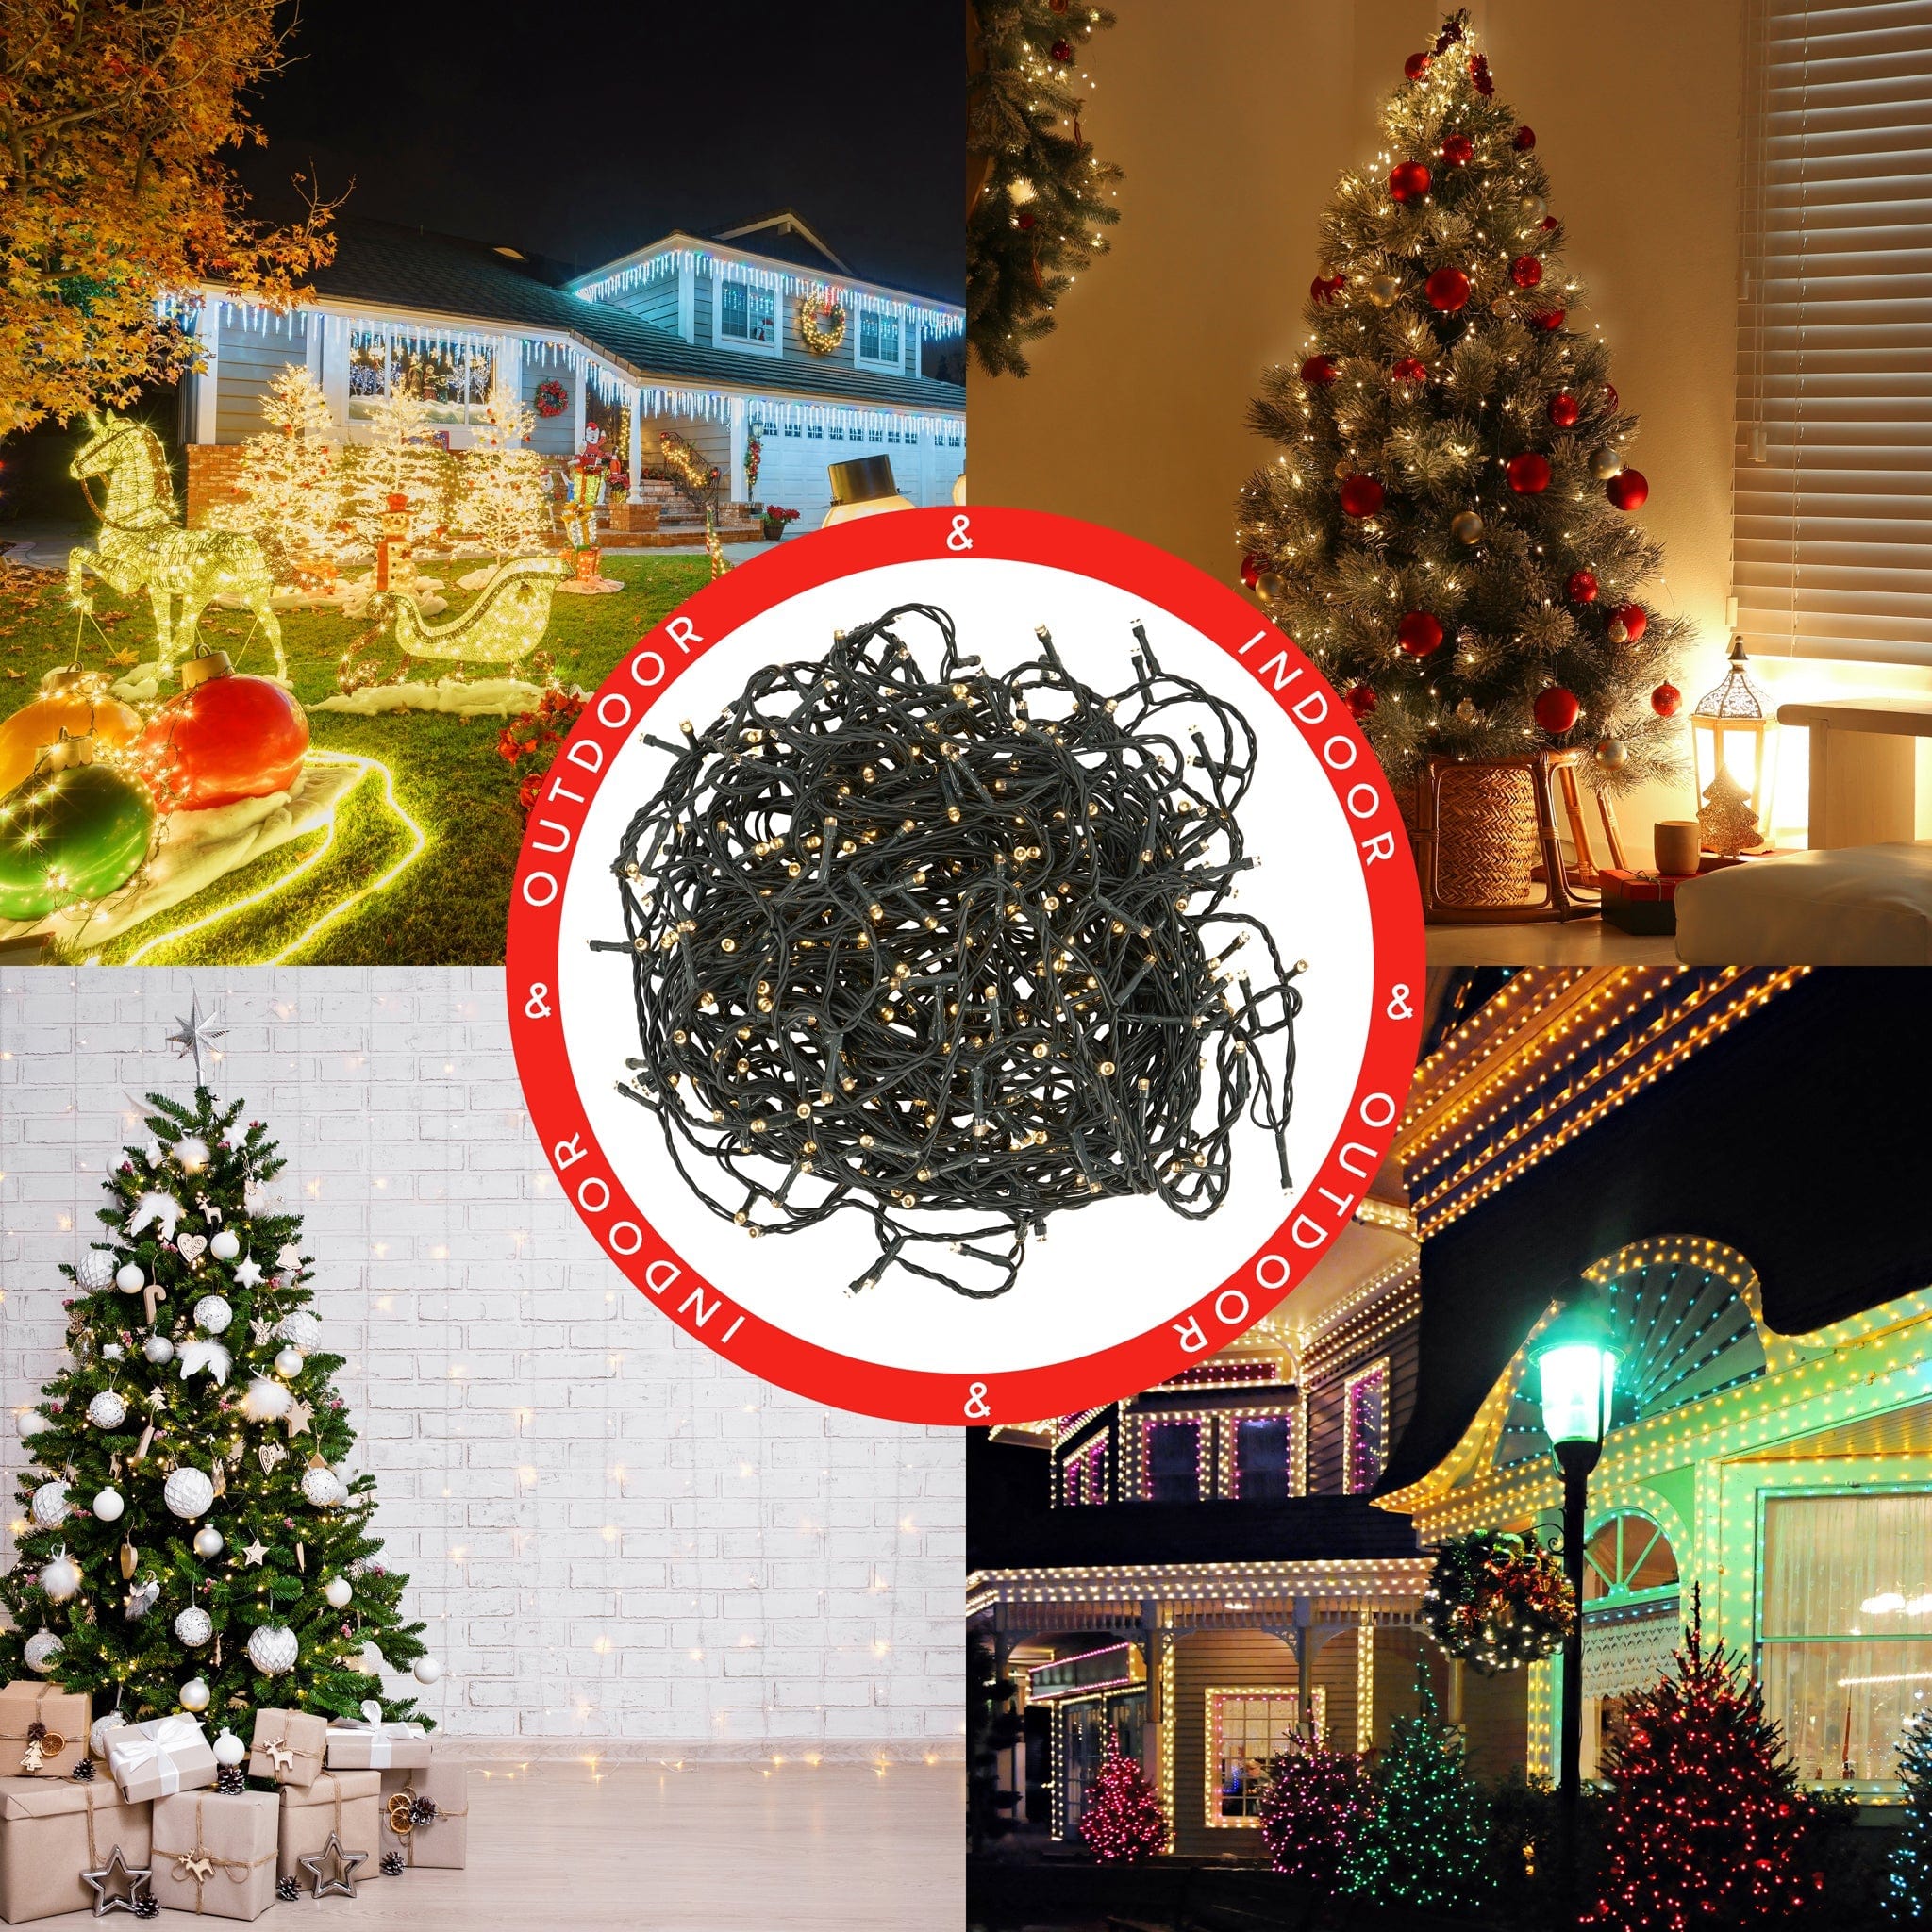 Indoor/Outdoor 8 Function LED Waterproof Fairy Lights with Green Cable (200 Lights - 18M Cable) - Warm White Lights 8800225807079 only5pounds-com